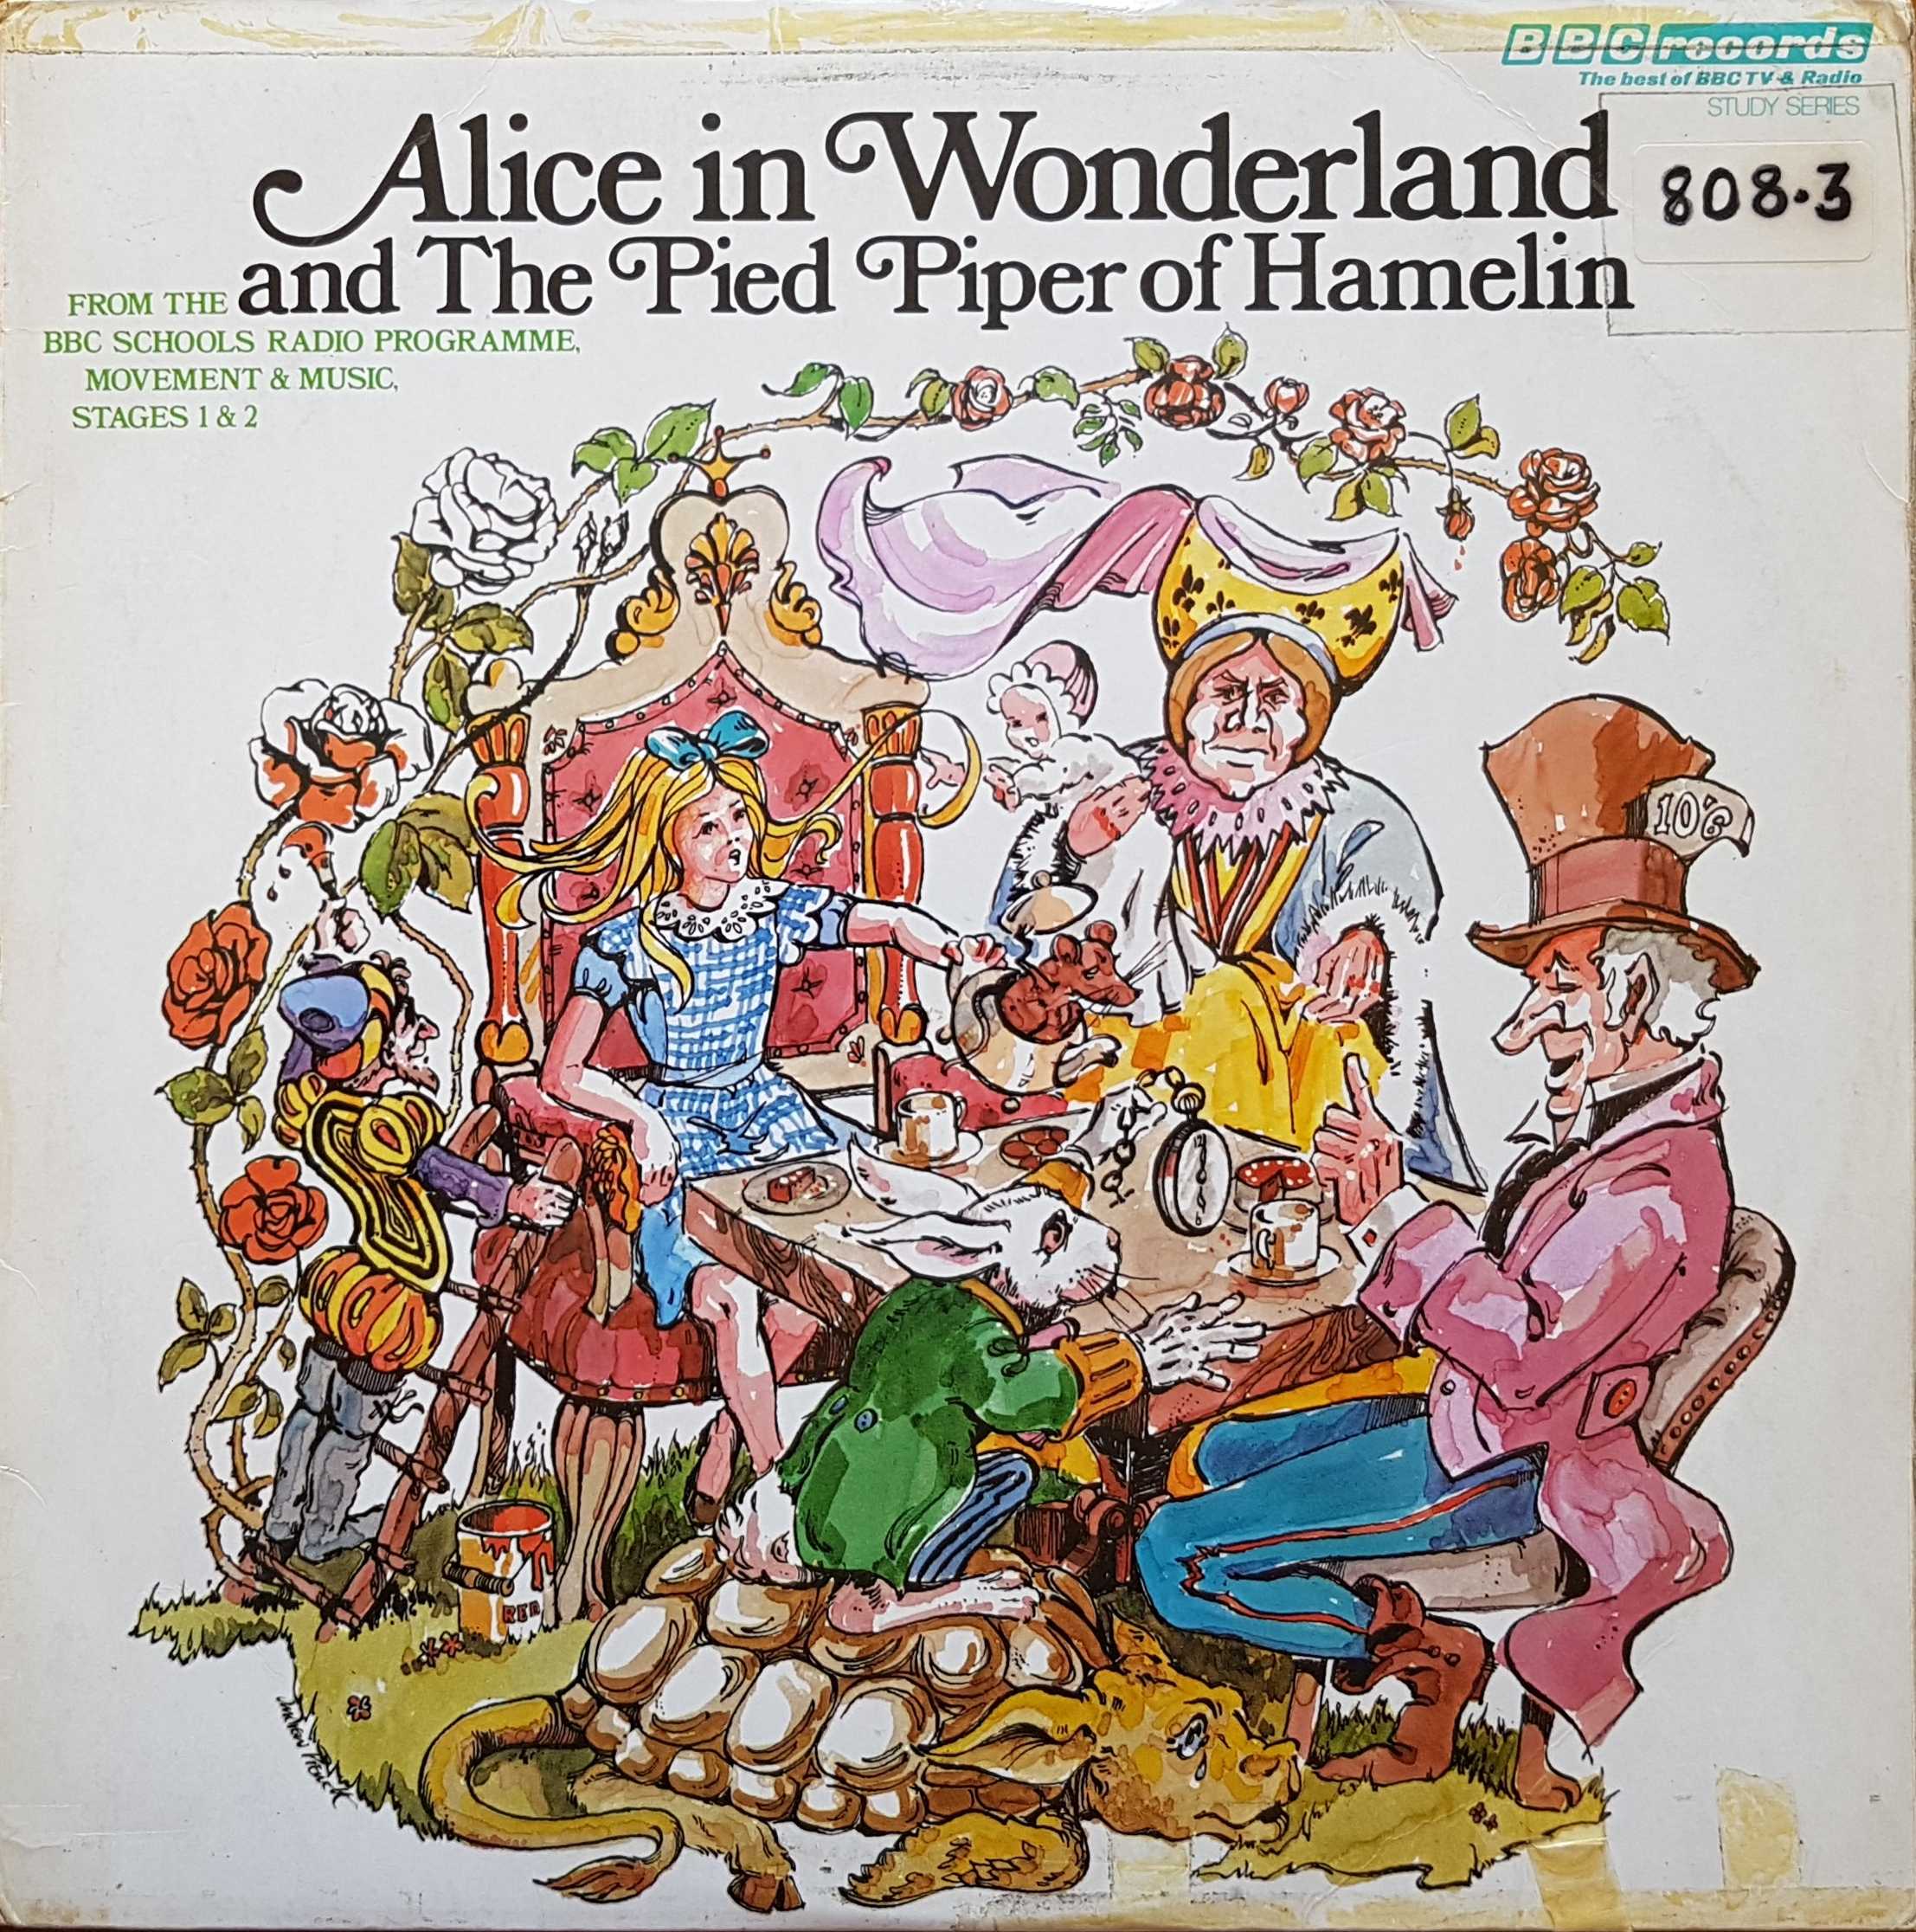 Picture of RESR 33 Alice in Wonderland and the pied piper of Hamelin by artist Vera Grey / Pamela Kenway from the BBC albums - Records and Tapes library